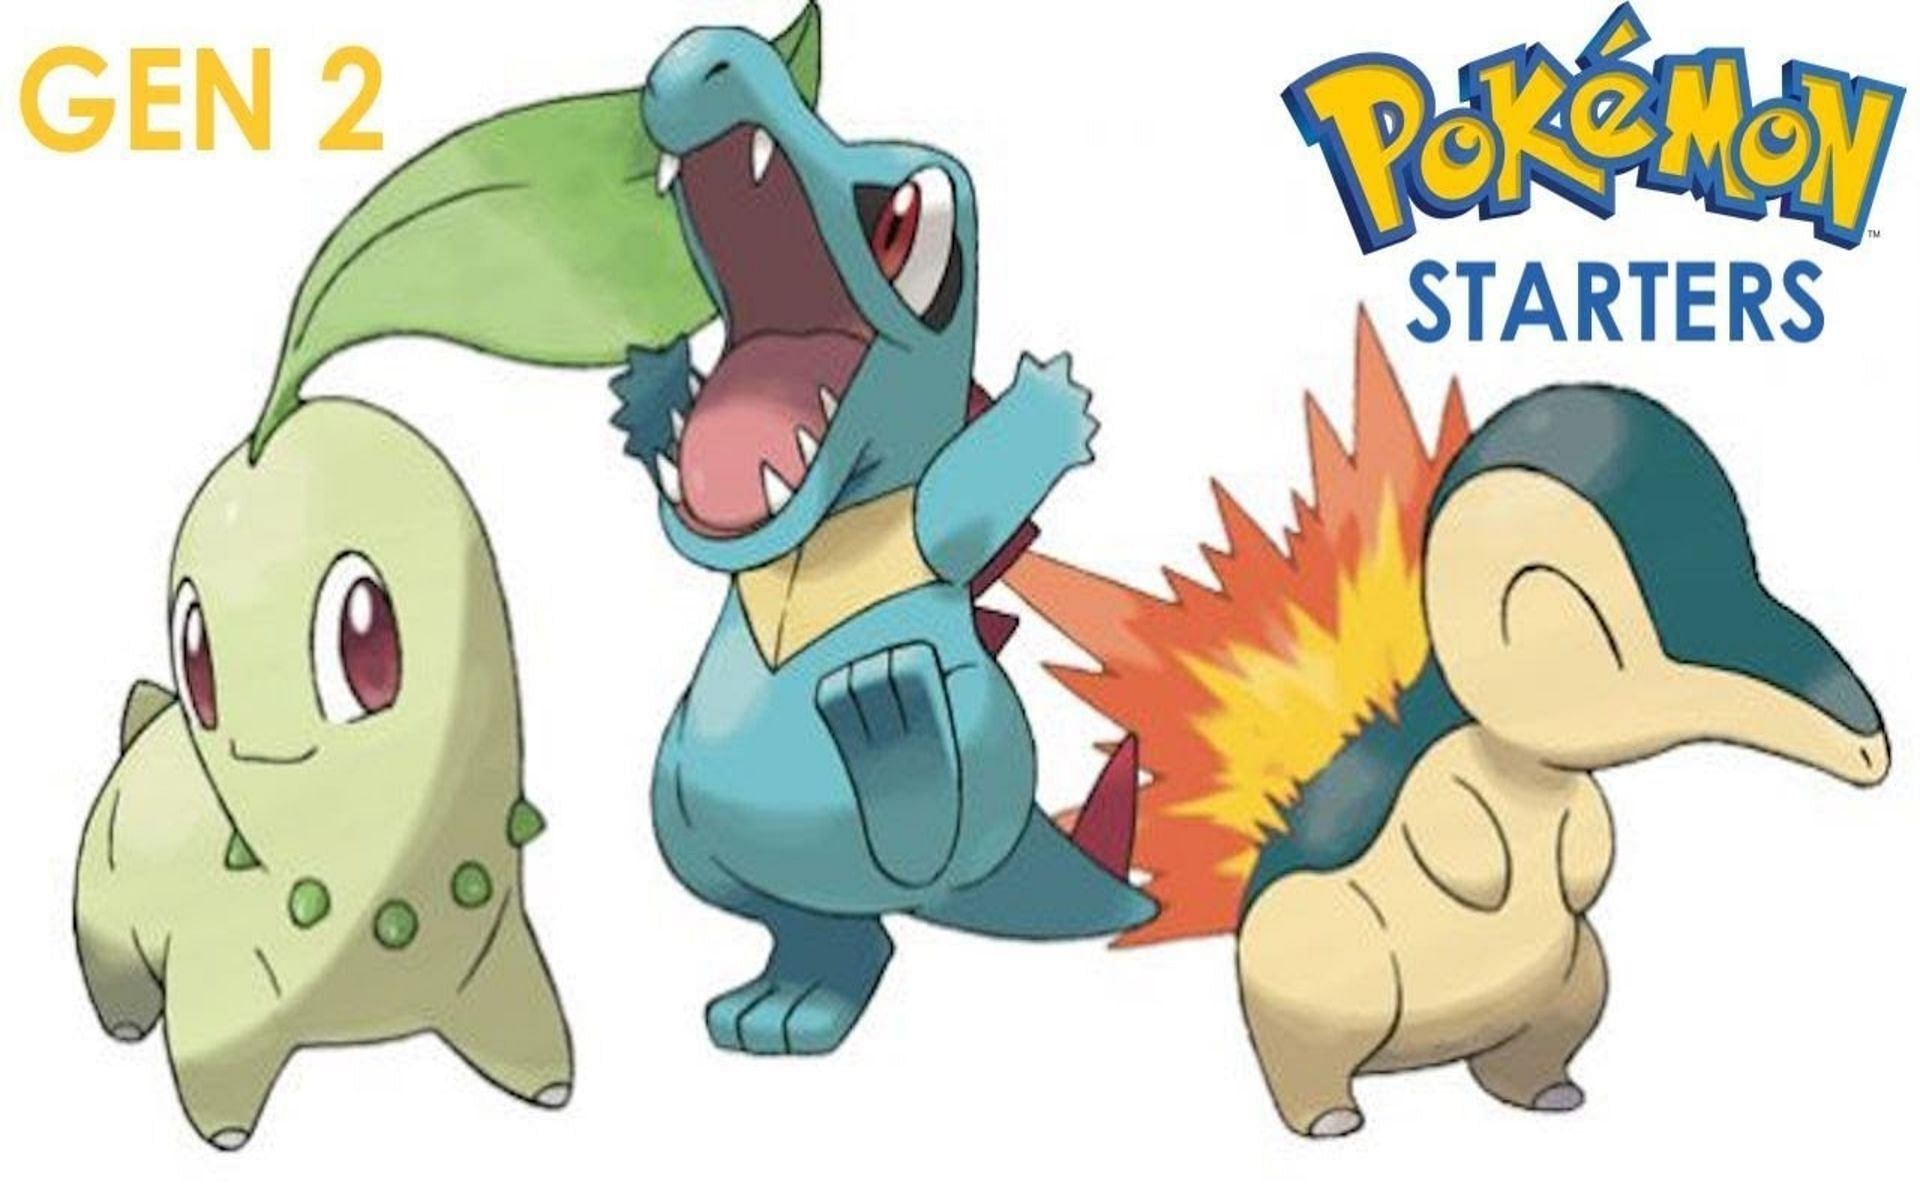 Players can get these Generation II starters from Professor Elm (Image via Nifhall Zambri)